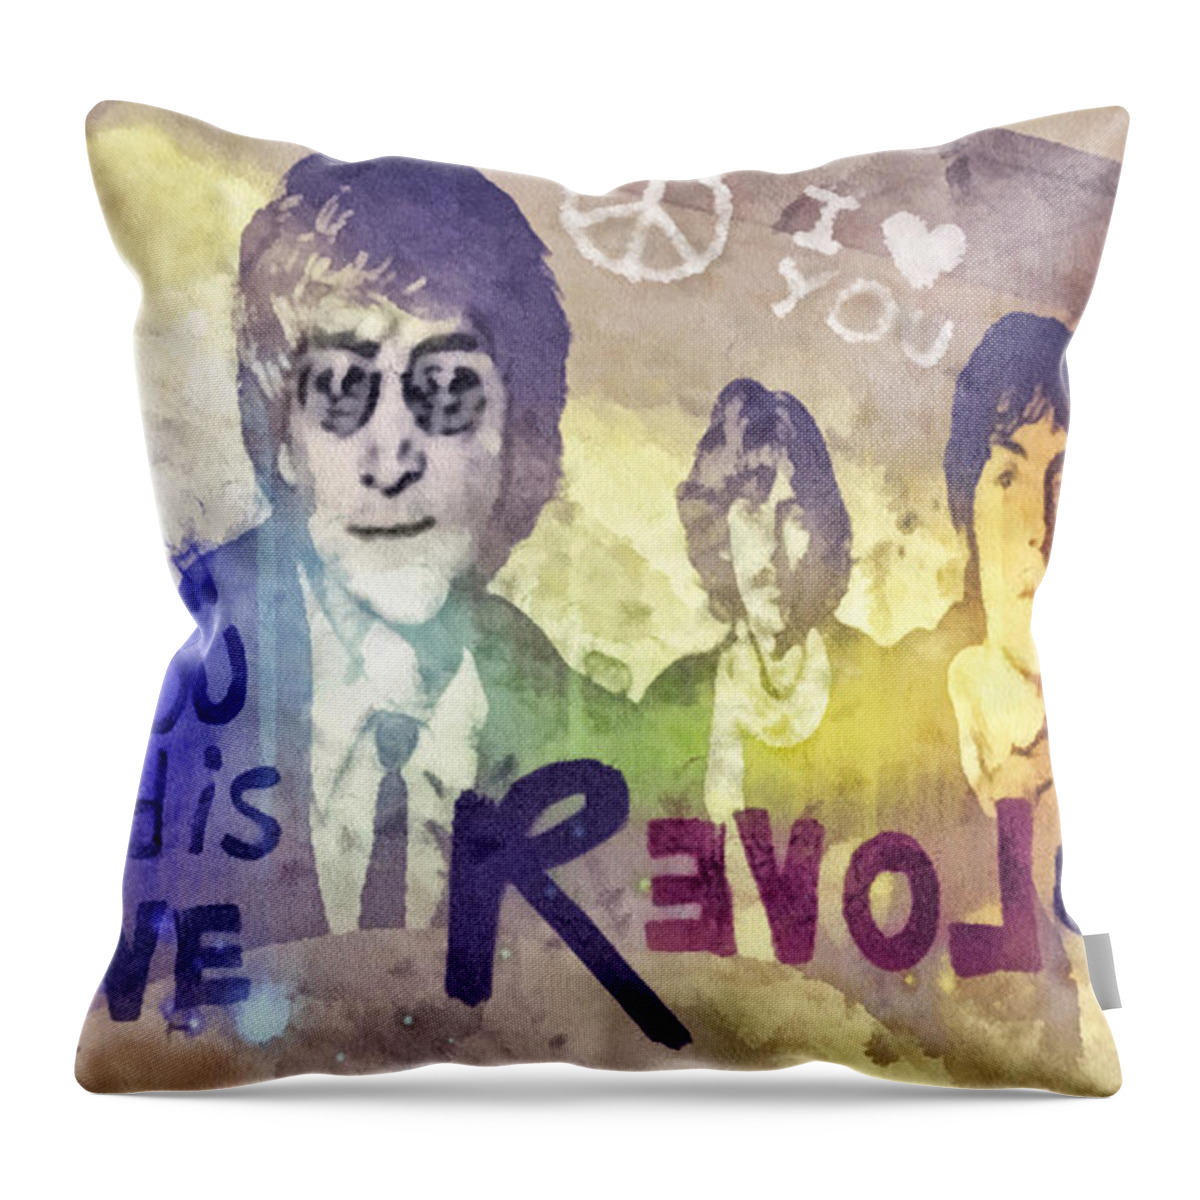 Revolution Throw Pillow featuring the mixed media Revolution by Mo T